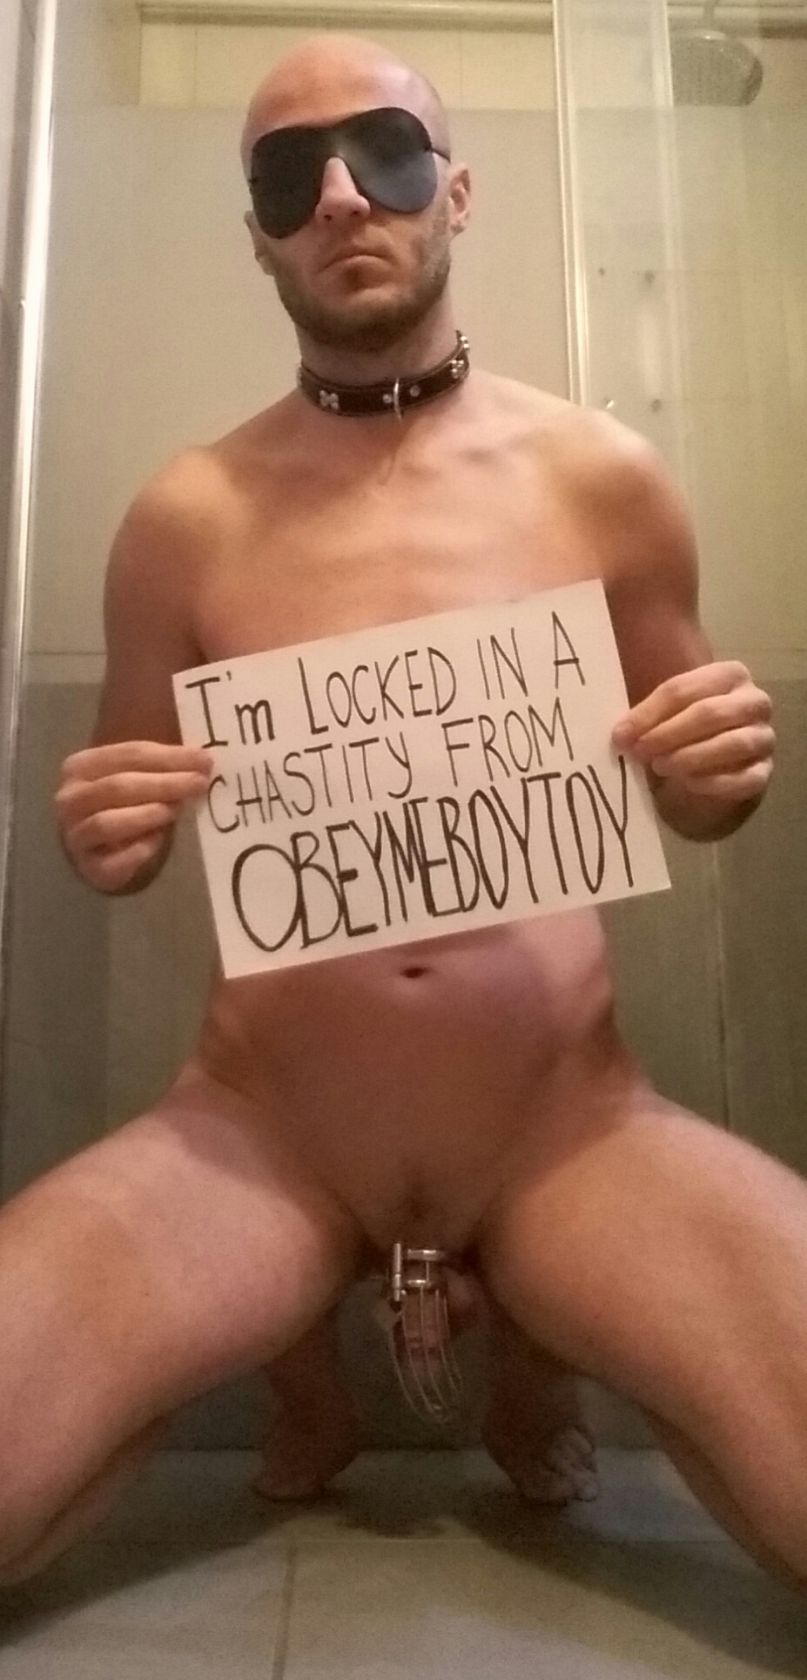 My online Mistress locked me in a chastity